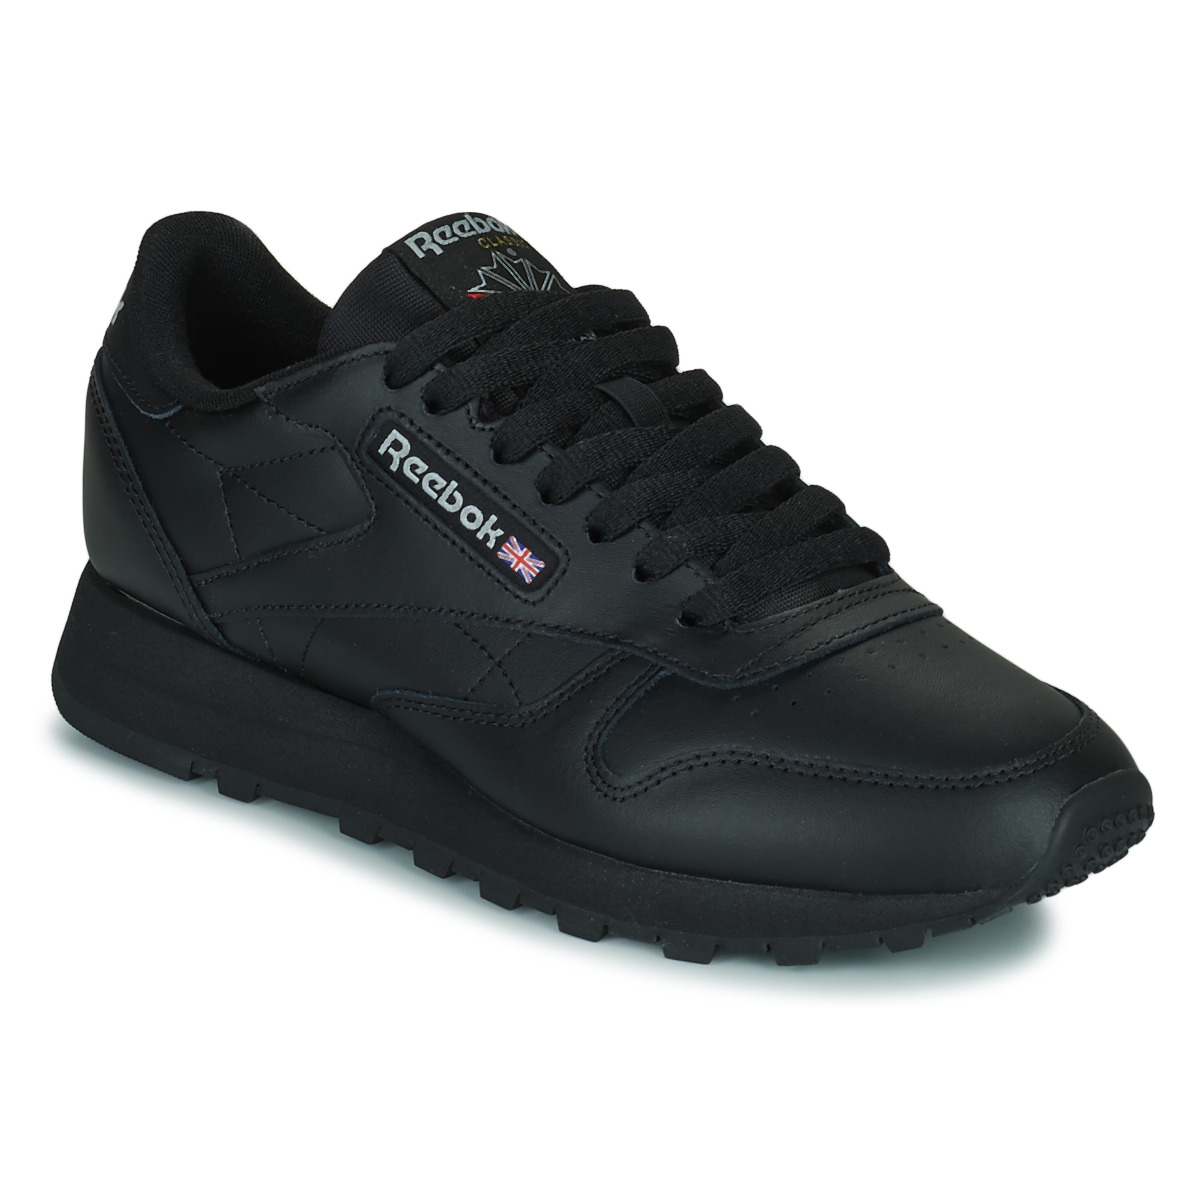 Reebok Classic CLASSIC LEATHER Black - Free delivery